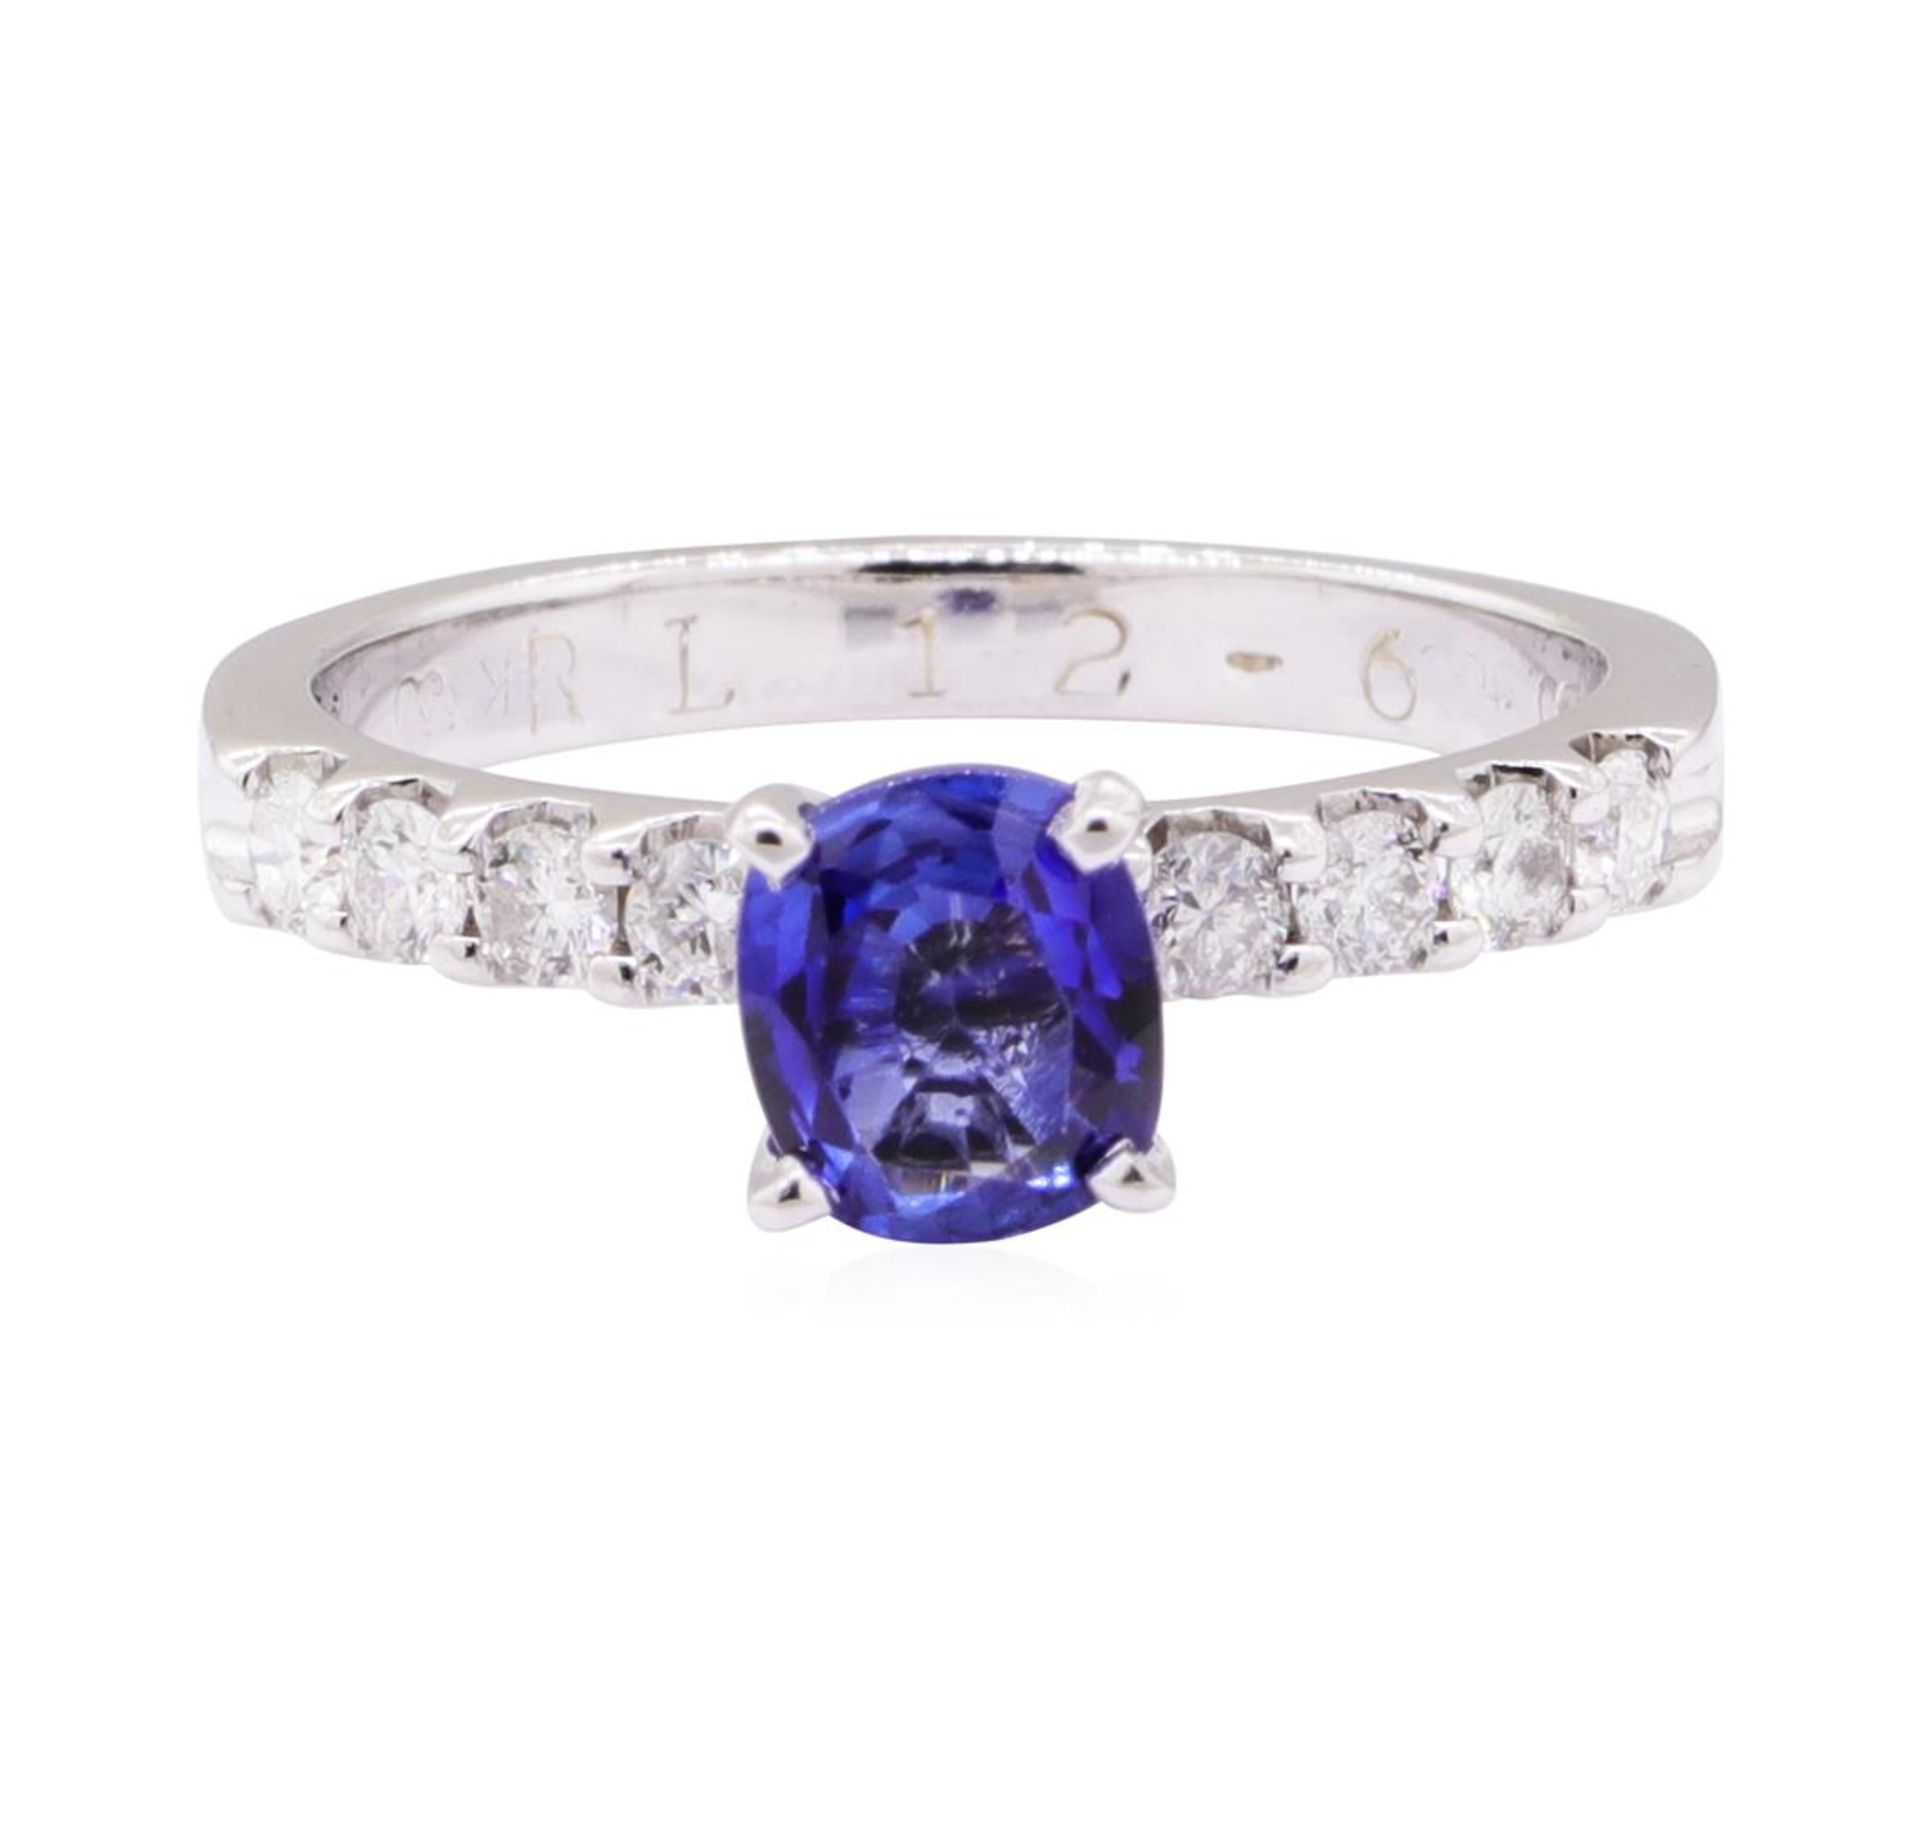 1.11 ctw Blue Sapphire and Diamond Ring - 14KT White Gold - Image 2 of 4